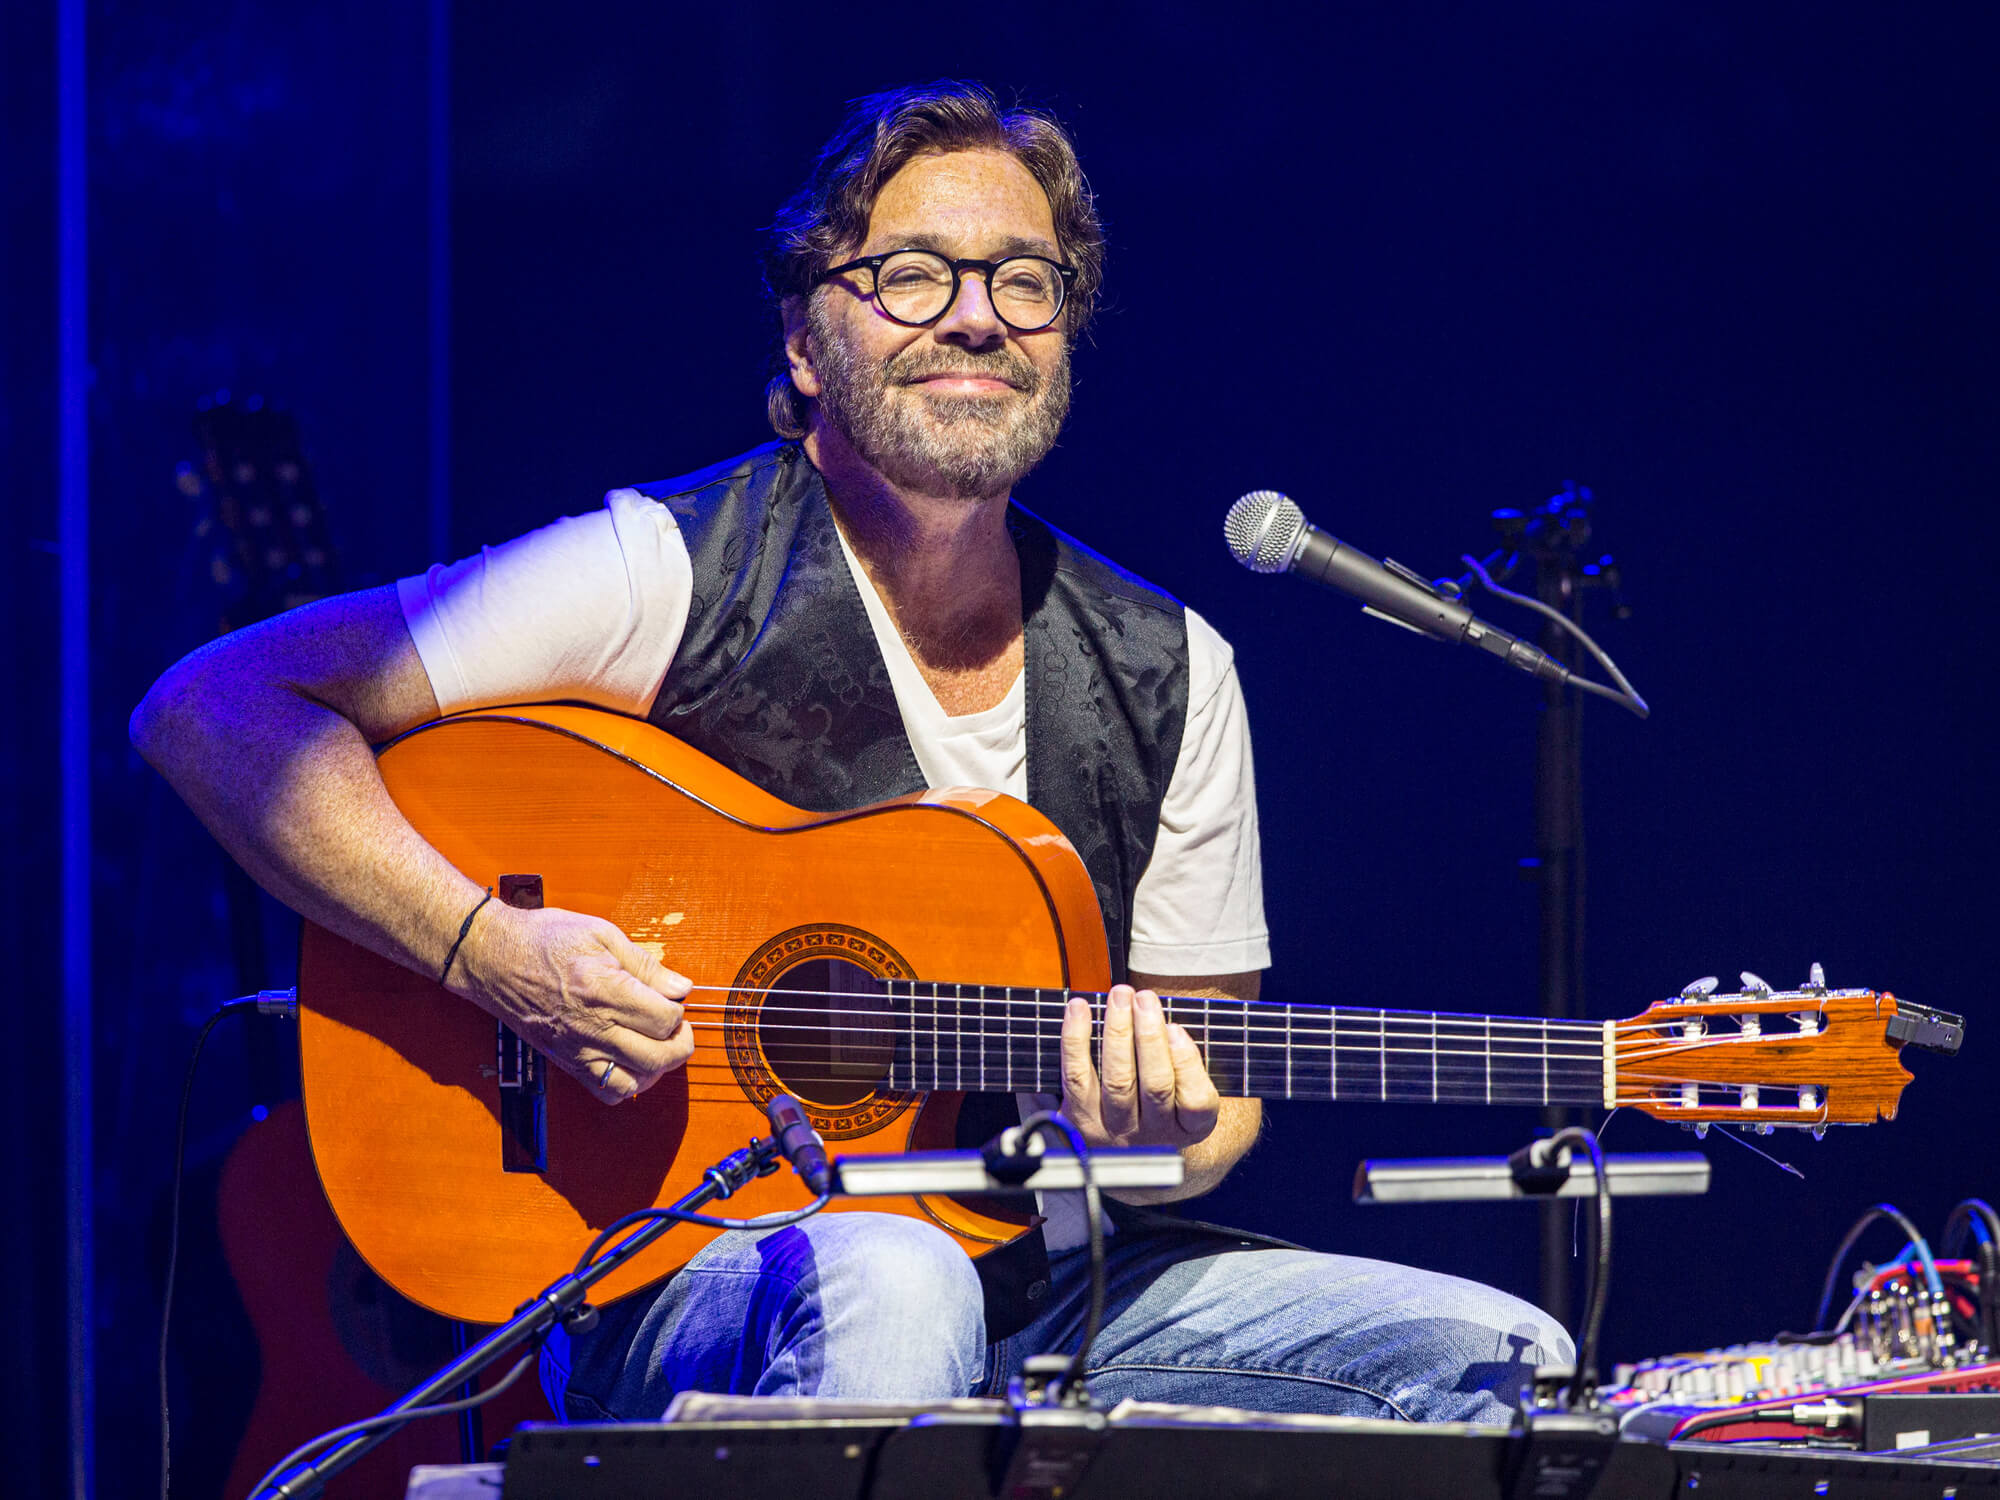 Al Di Meola now stable after suffering heart attack onstage